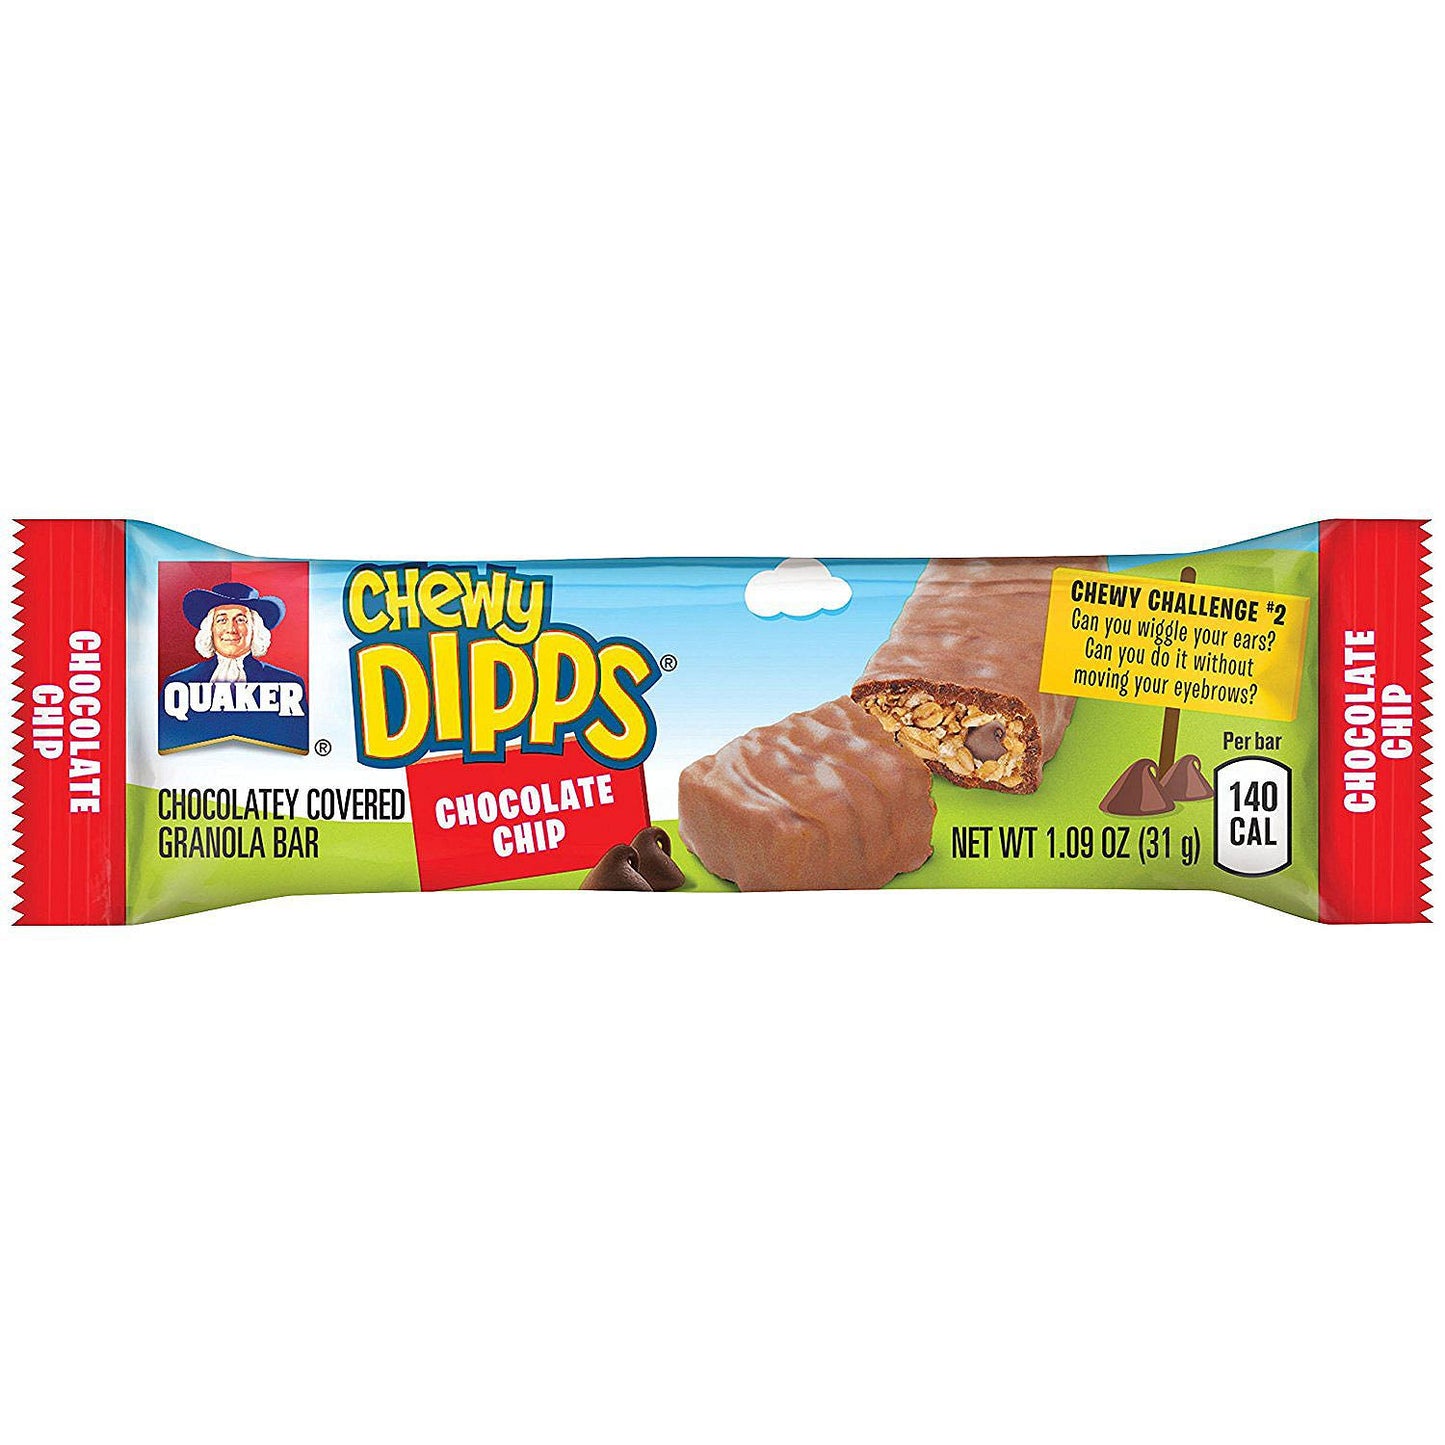 Quaker Chewy Dipps Granola Bar - Chocolate Chip